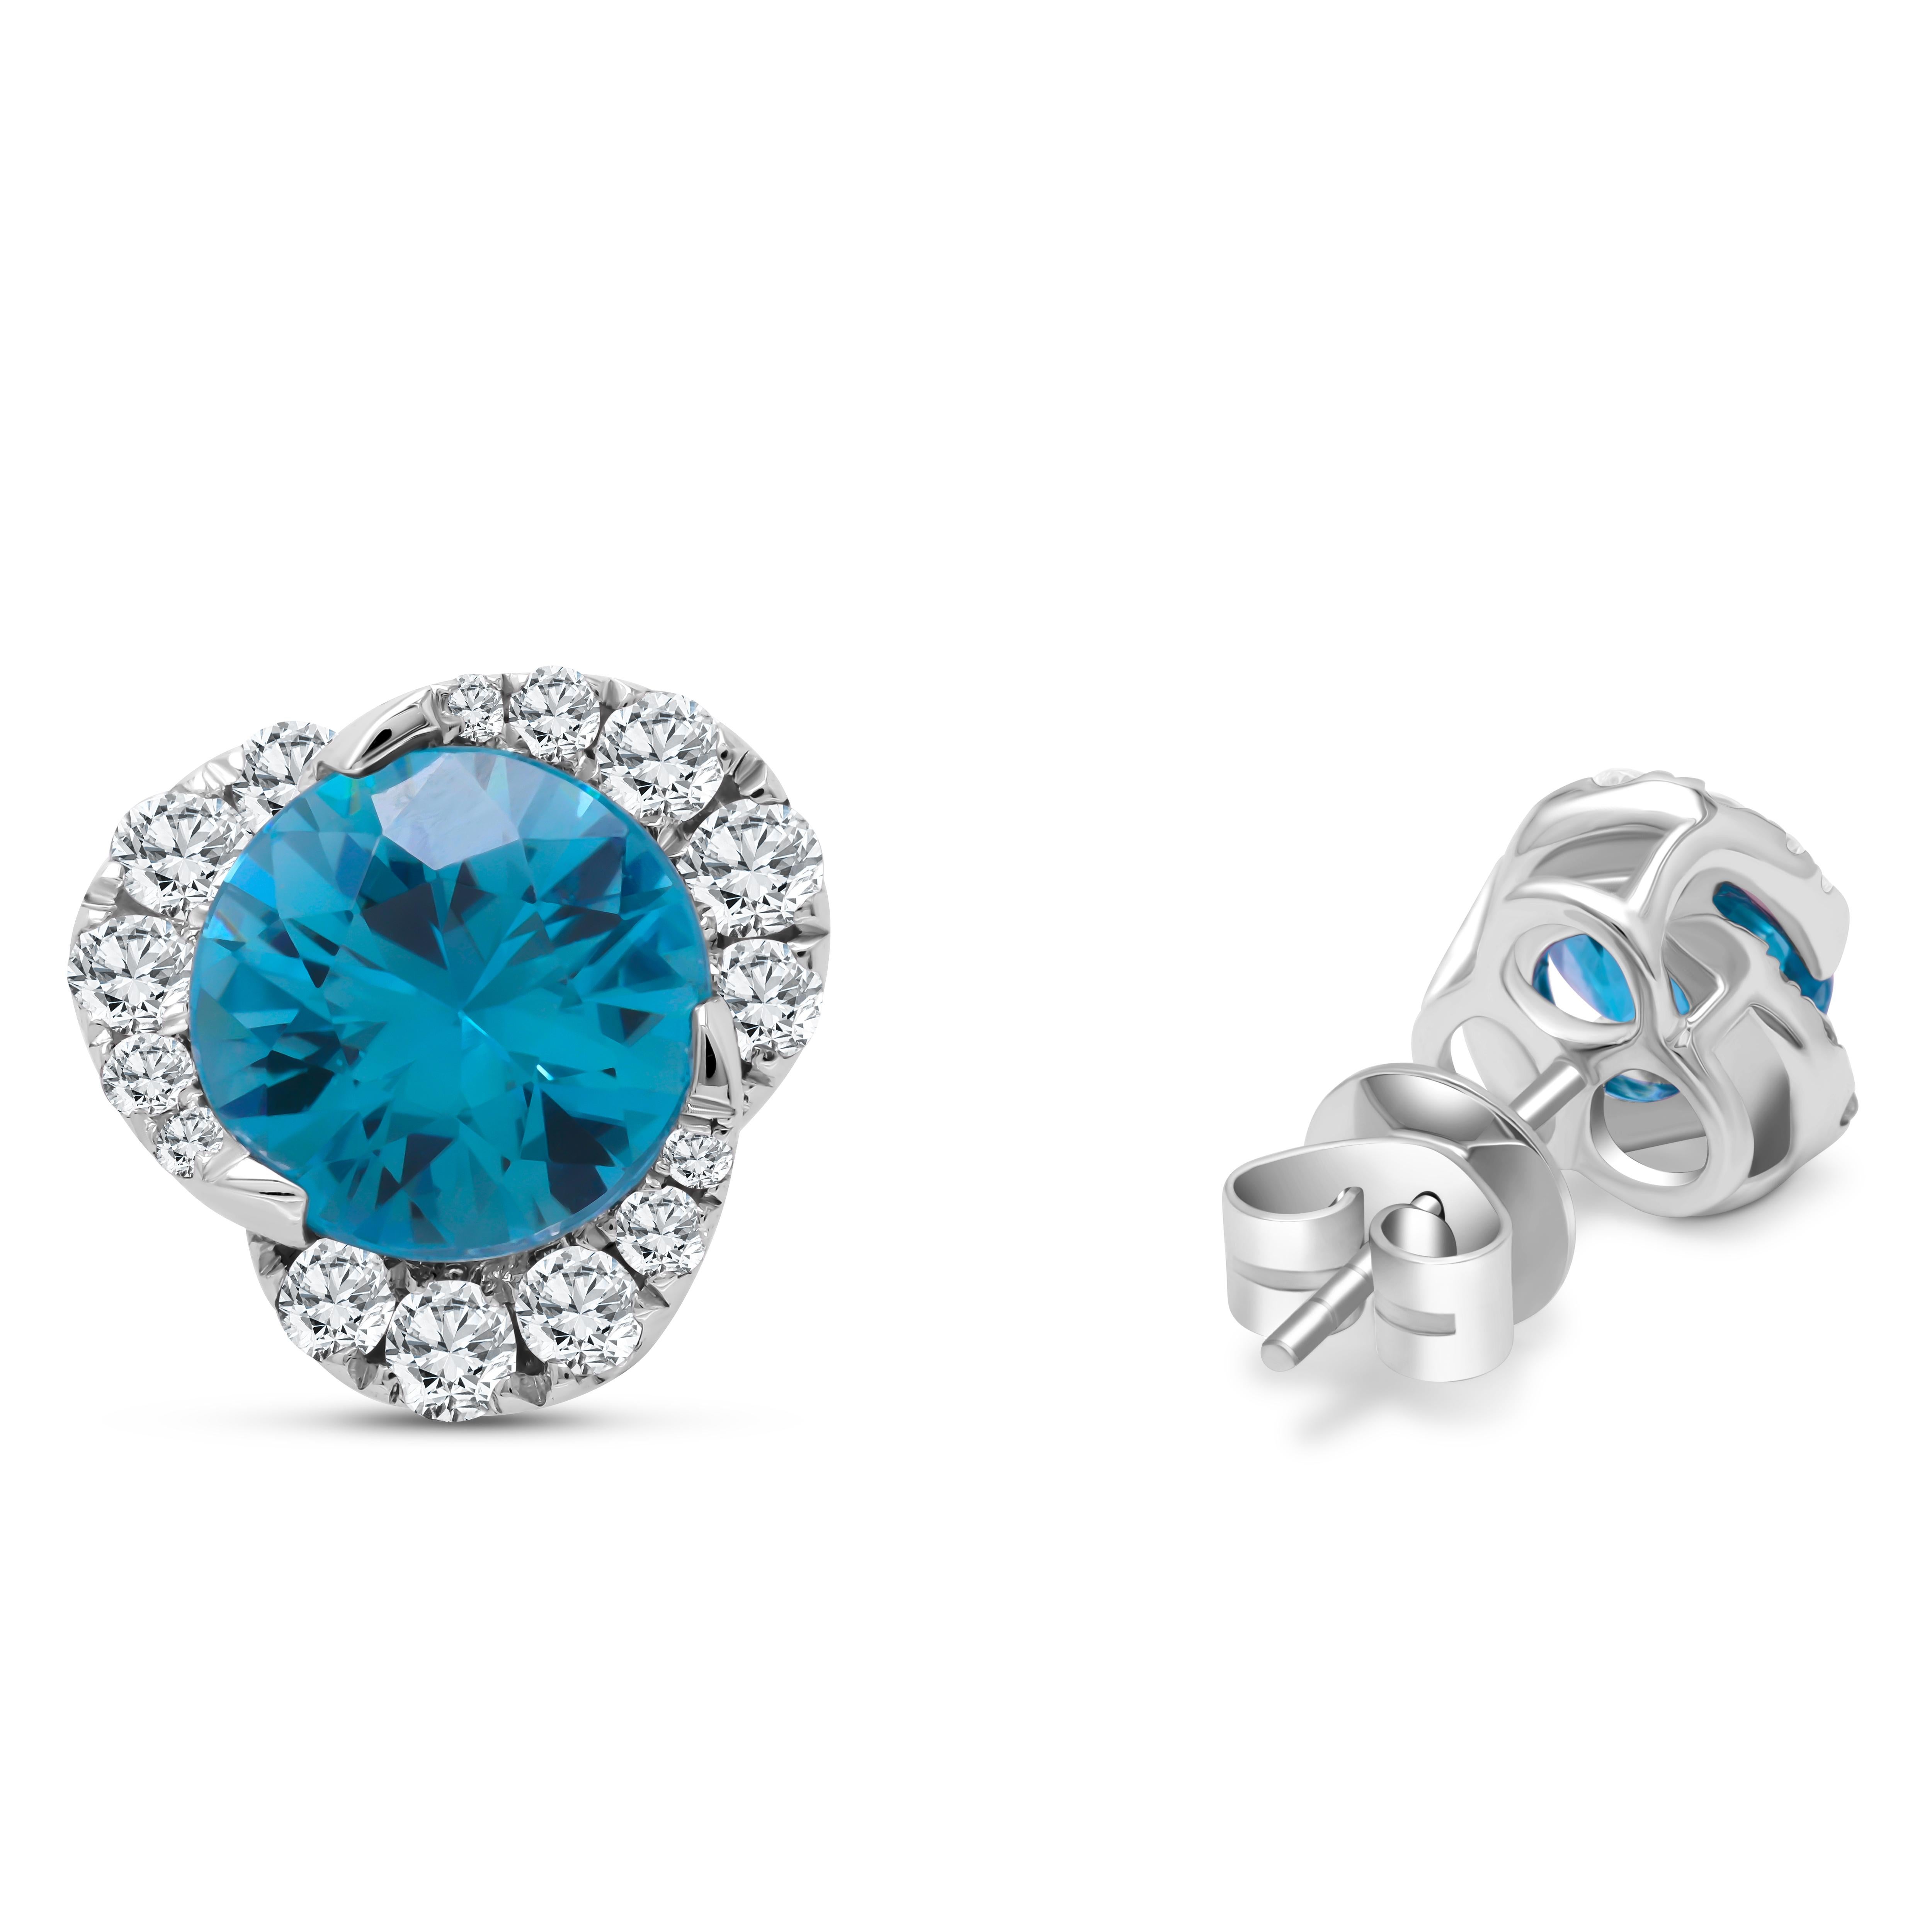 Introducing our exquisite Aqua Blue Zircon and Diamond Swirl Earrings, a true masterpiece of elegance and sophistication. These stunning earrings feature a mesmerizing 3.69 carat aqua blue zircon at their heart, cradled within a graduated swirl of